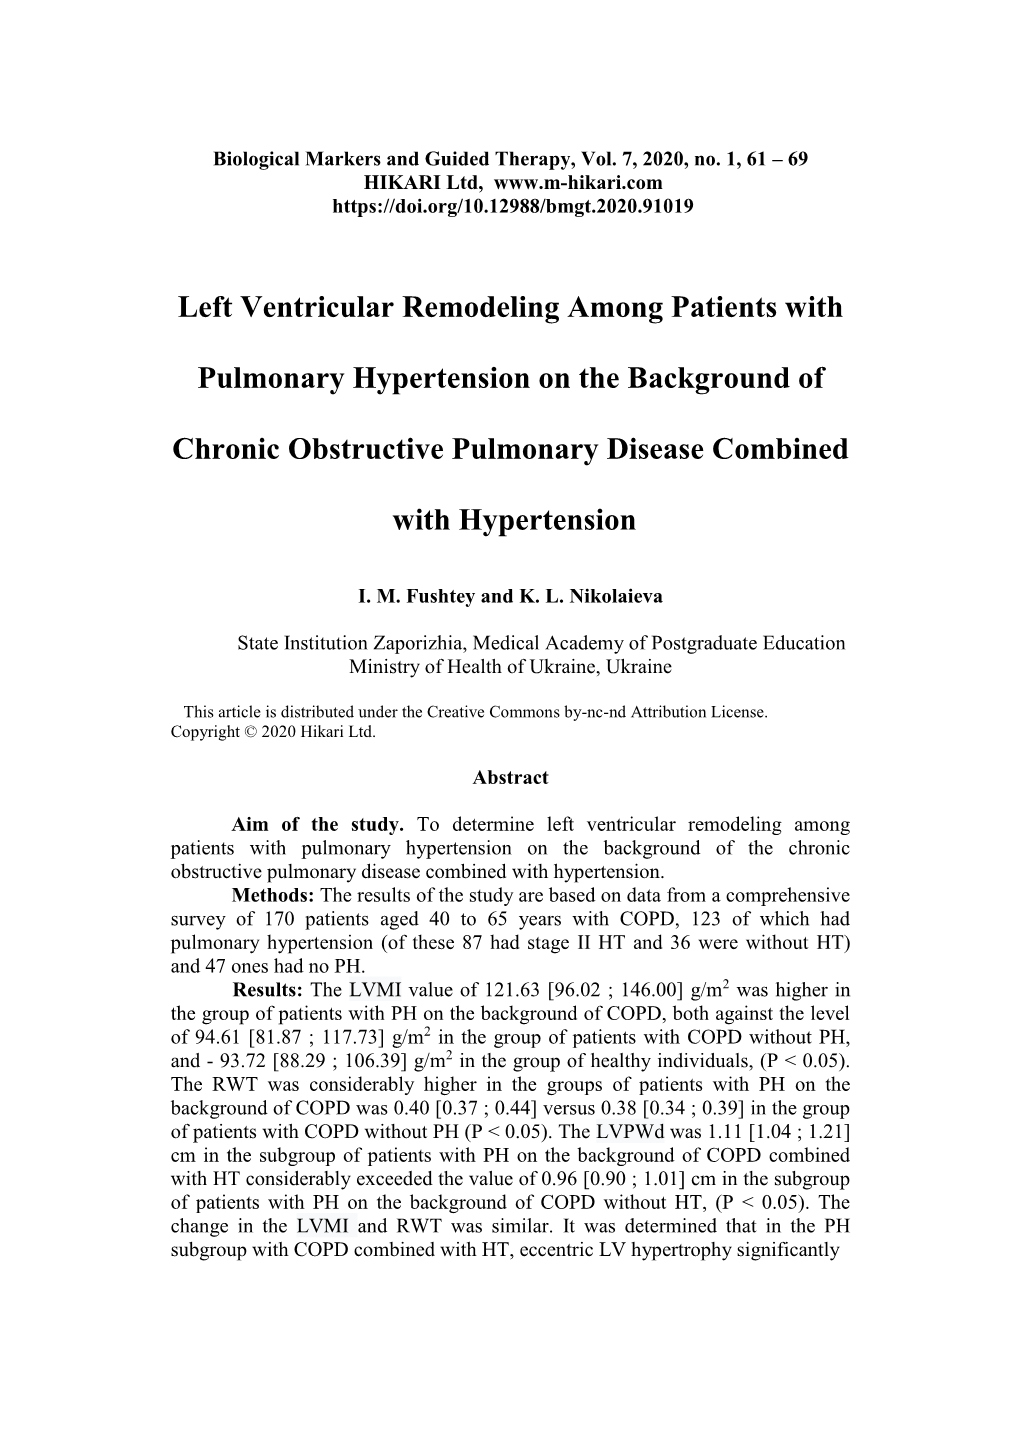 Left Ventricular Remodeling Among Patients with Pulmonary Hypertension on the Background of the Chronic Obstructive Pulmonary Disease Combined with Hypertension